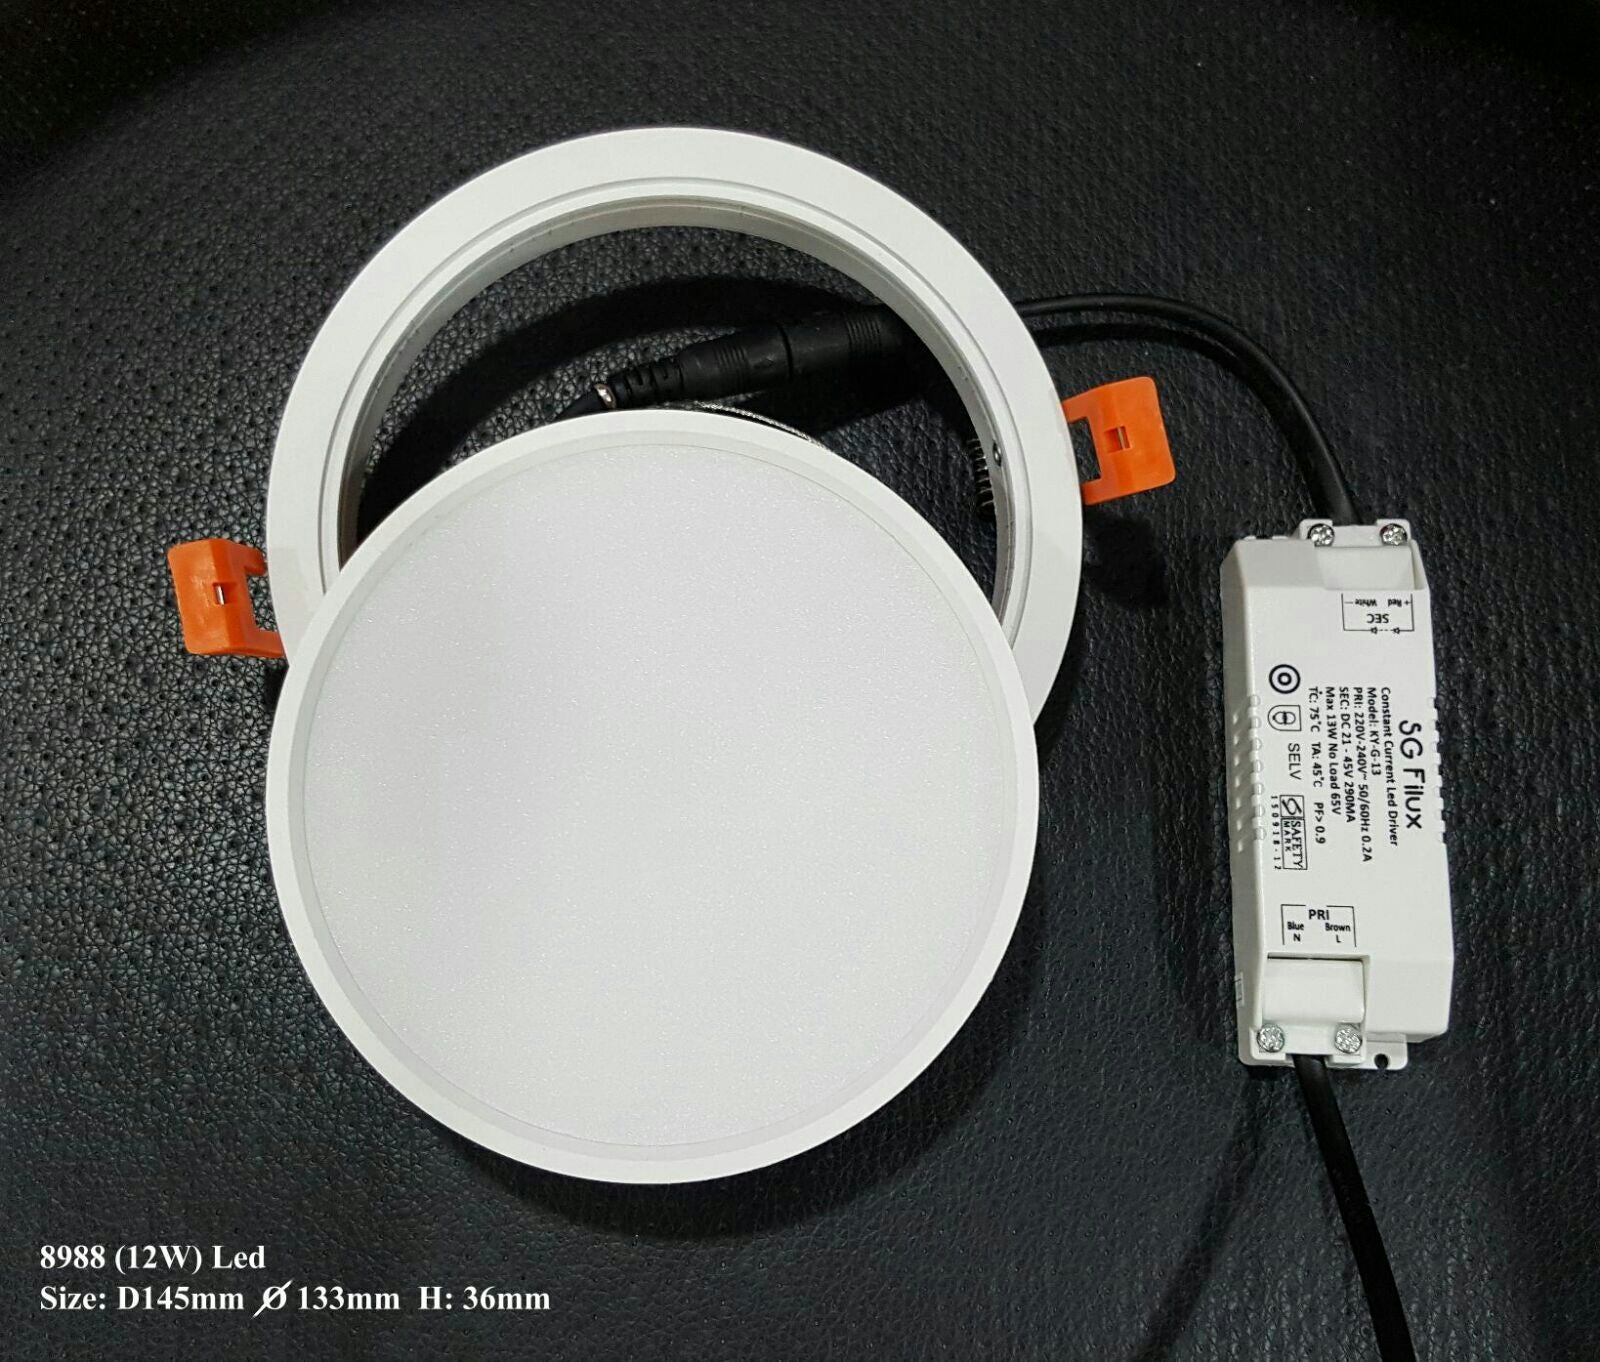 LED Round 8988/8989 (12w/18w) Downlights (Removable Frame) with Safety Mark Driver - Three Cubes Lightings (Singapore)